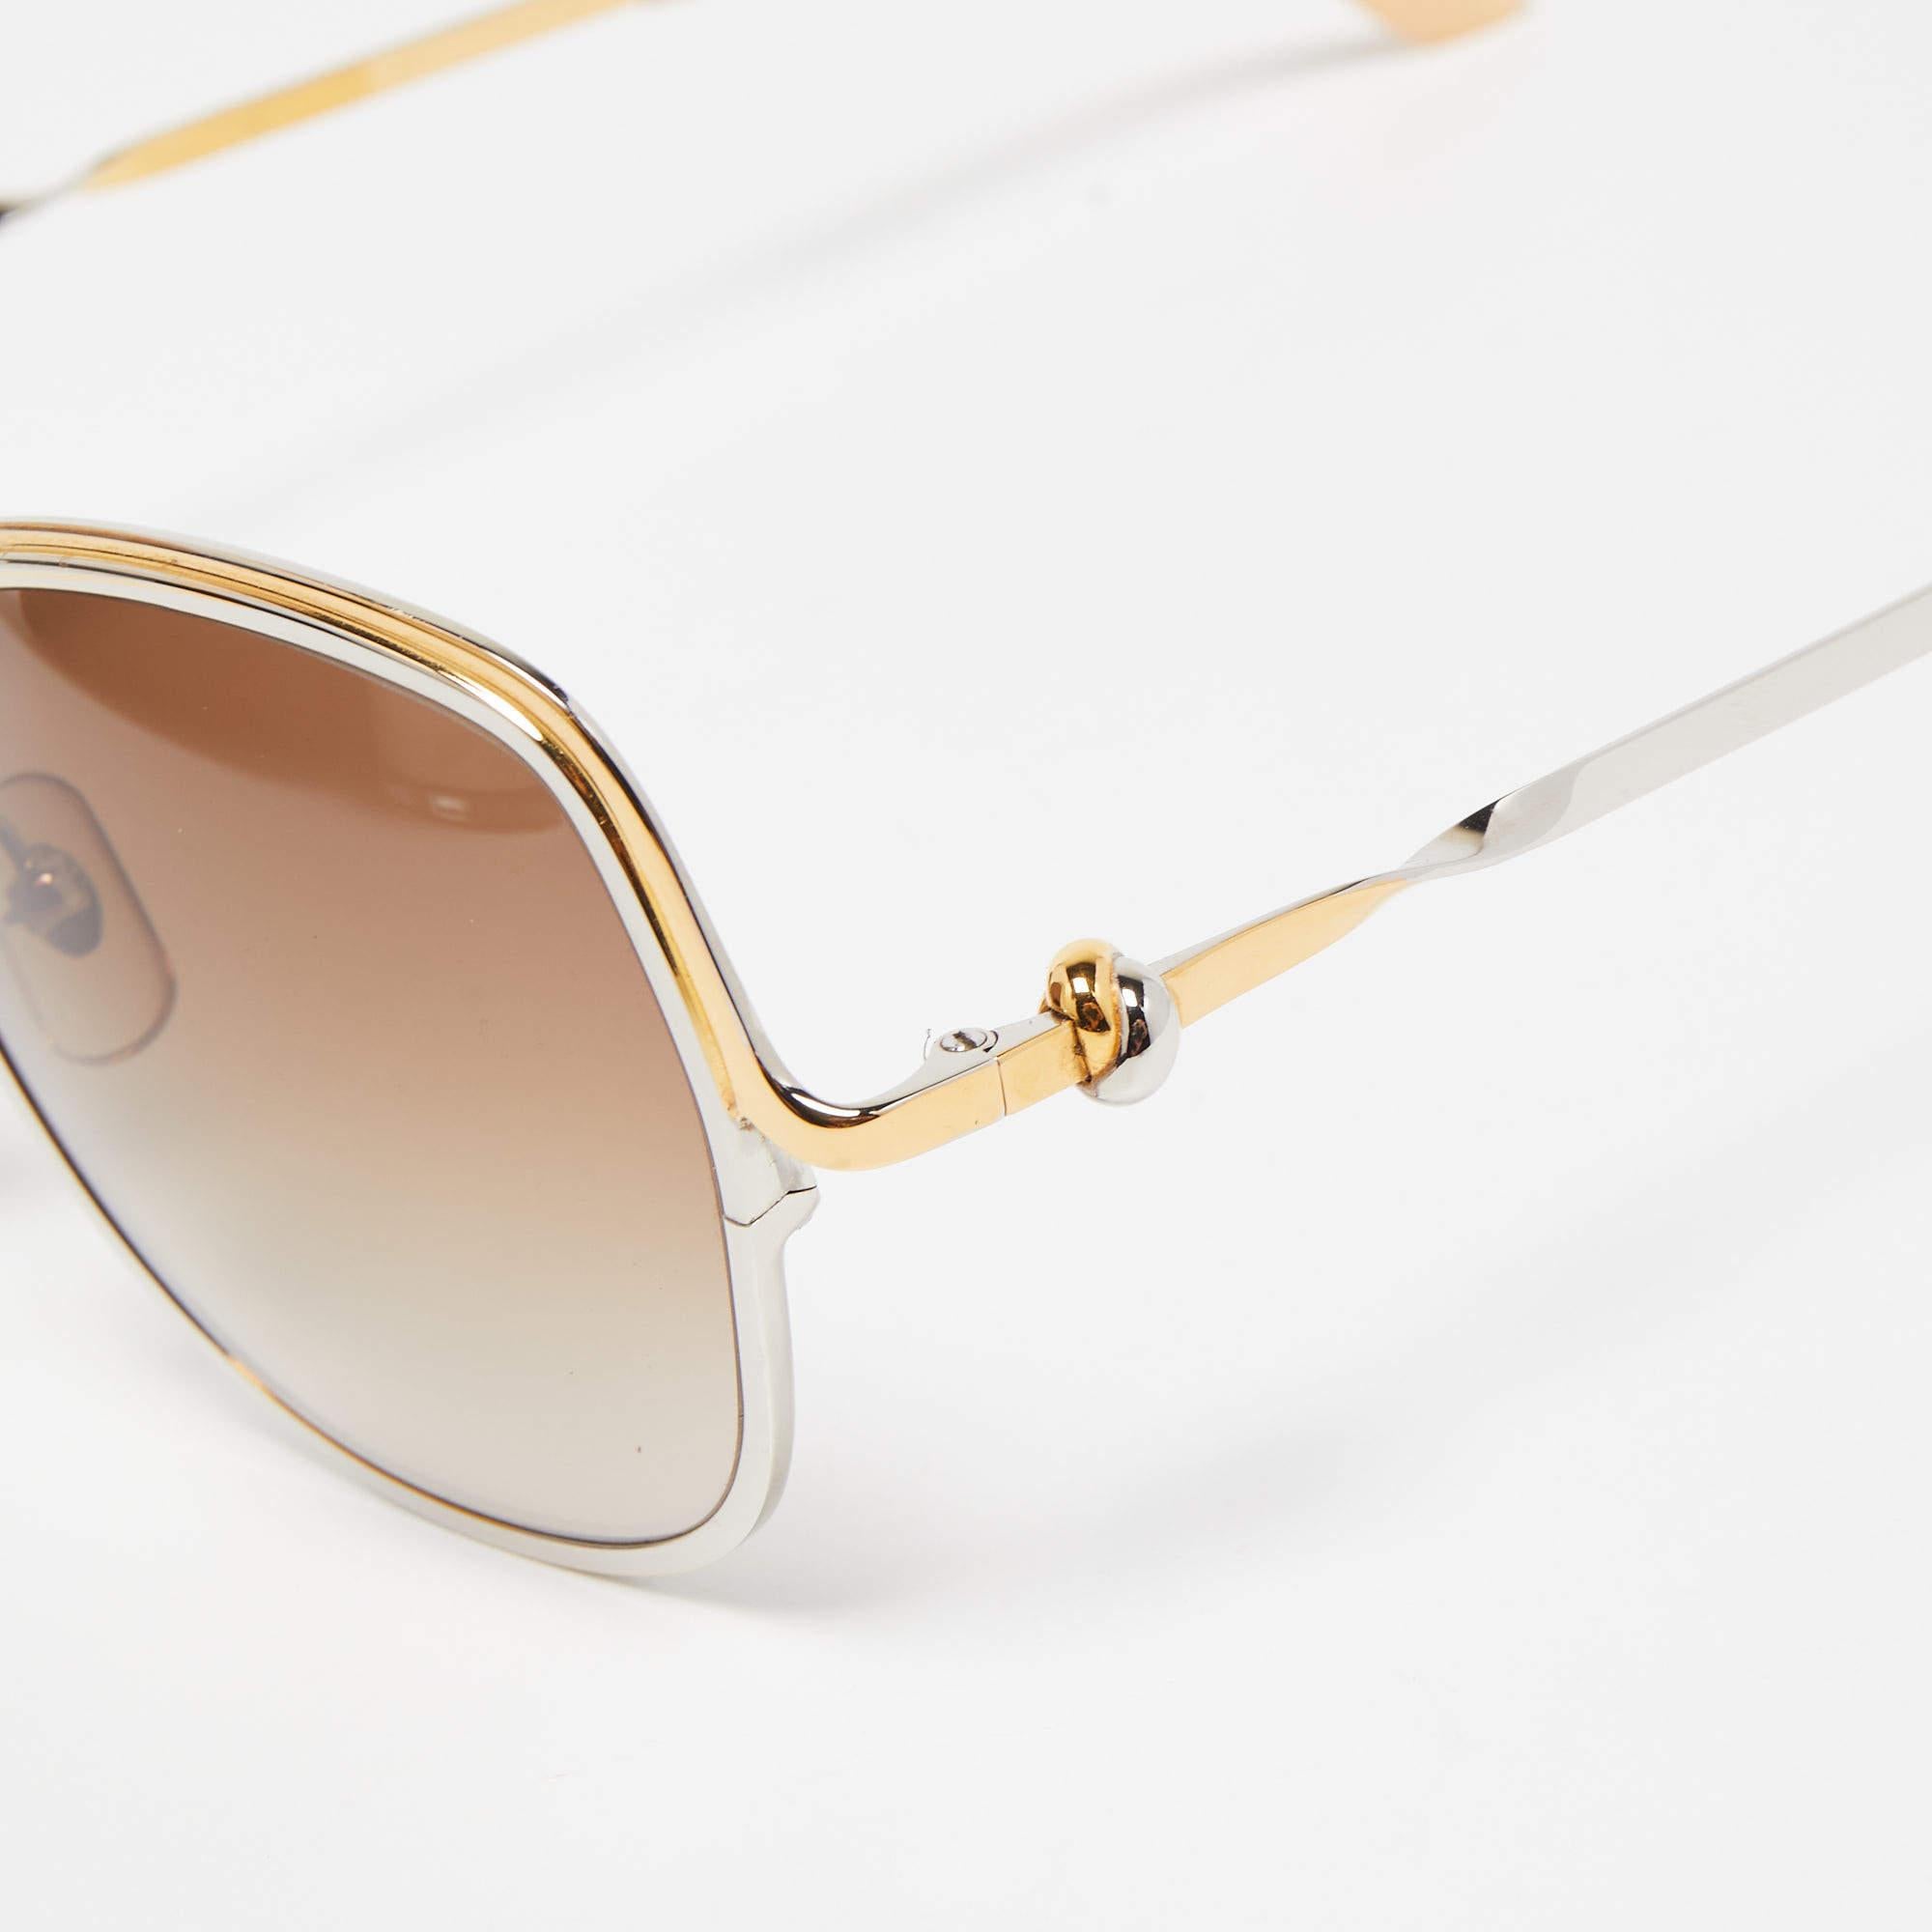 A statement pair of sunglasses from Cartier will surely make a prized buy. Featuring a trendy frame and lenses meant to protect your eyes, the sunglasses are ideal for all-day wear.

